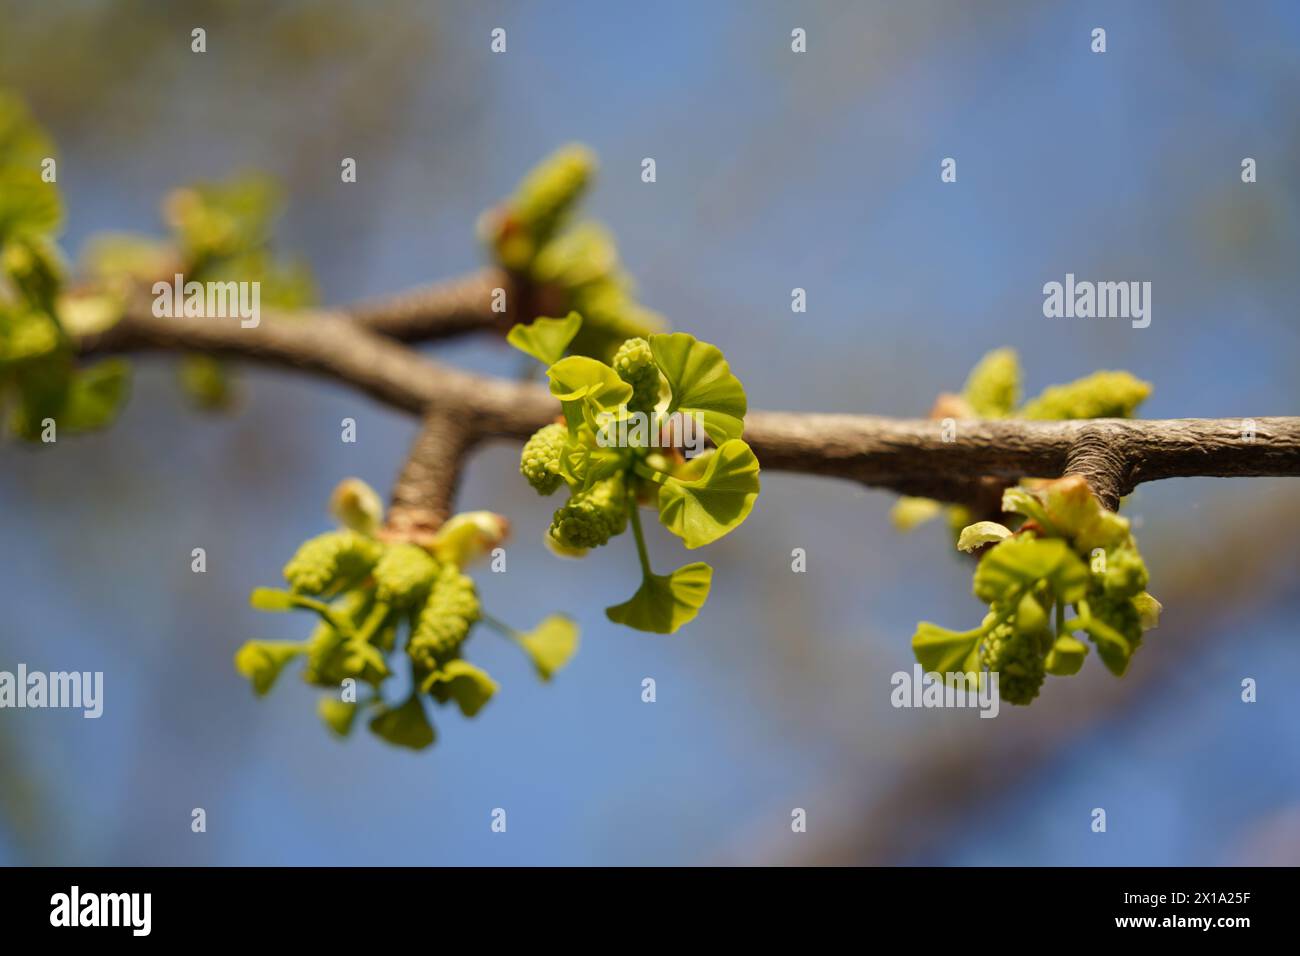 Ginkgo tree leaves sprouting new buds Stock Photo